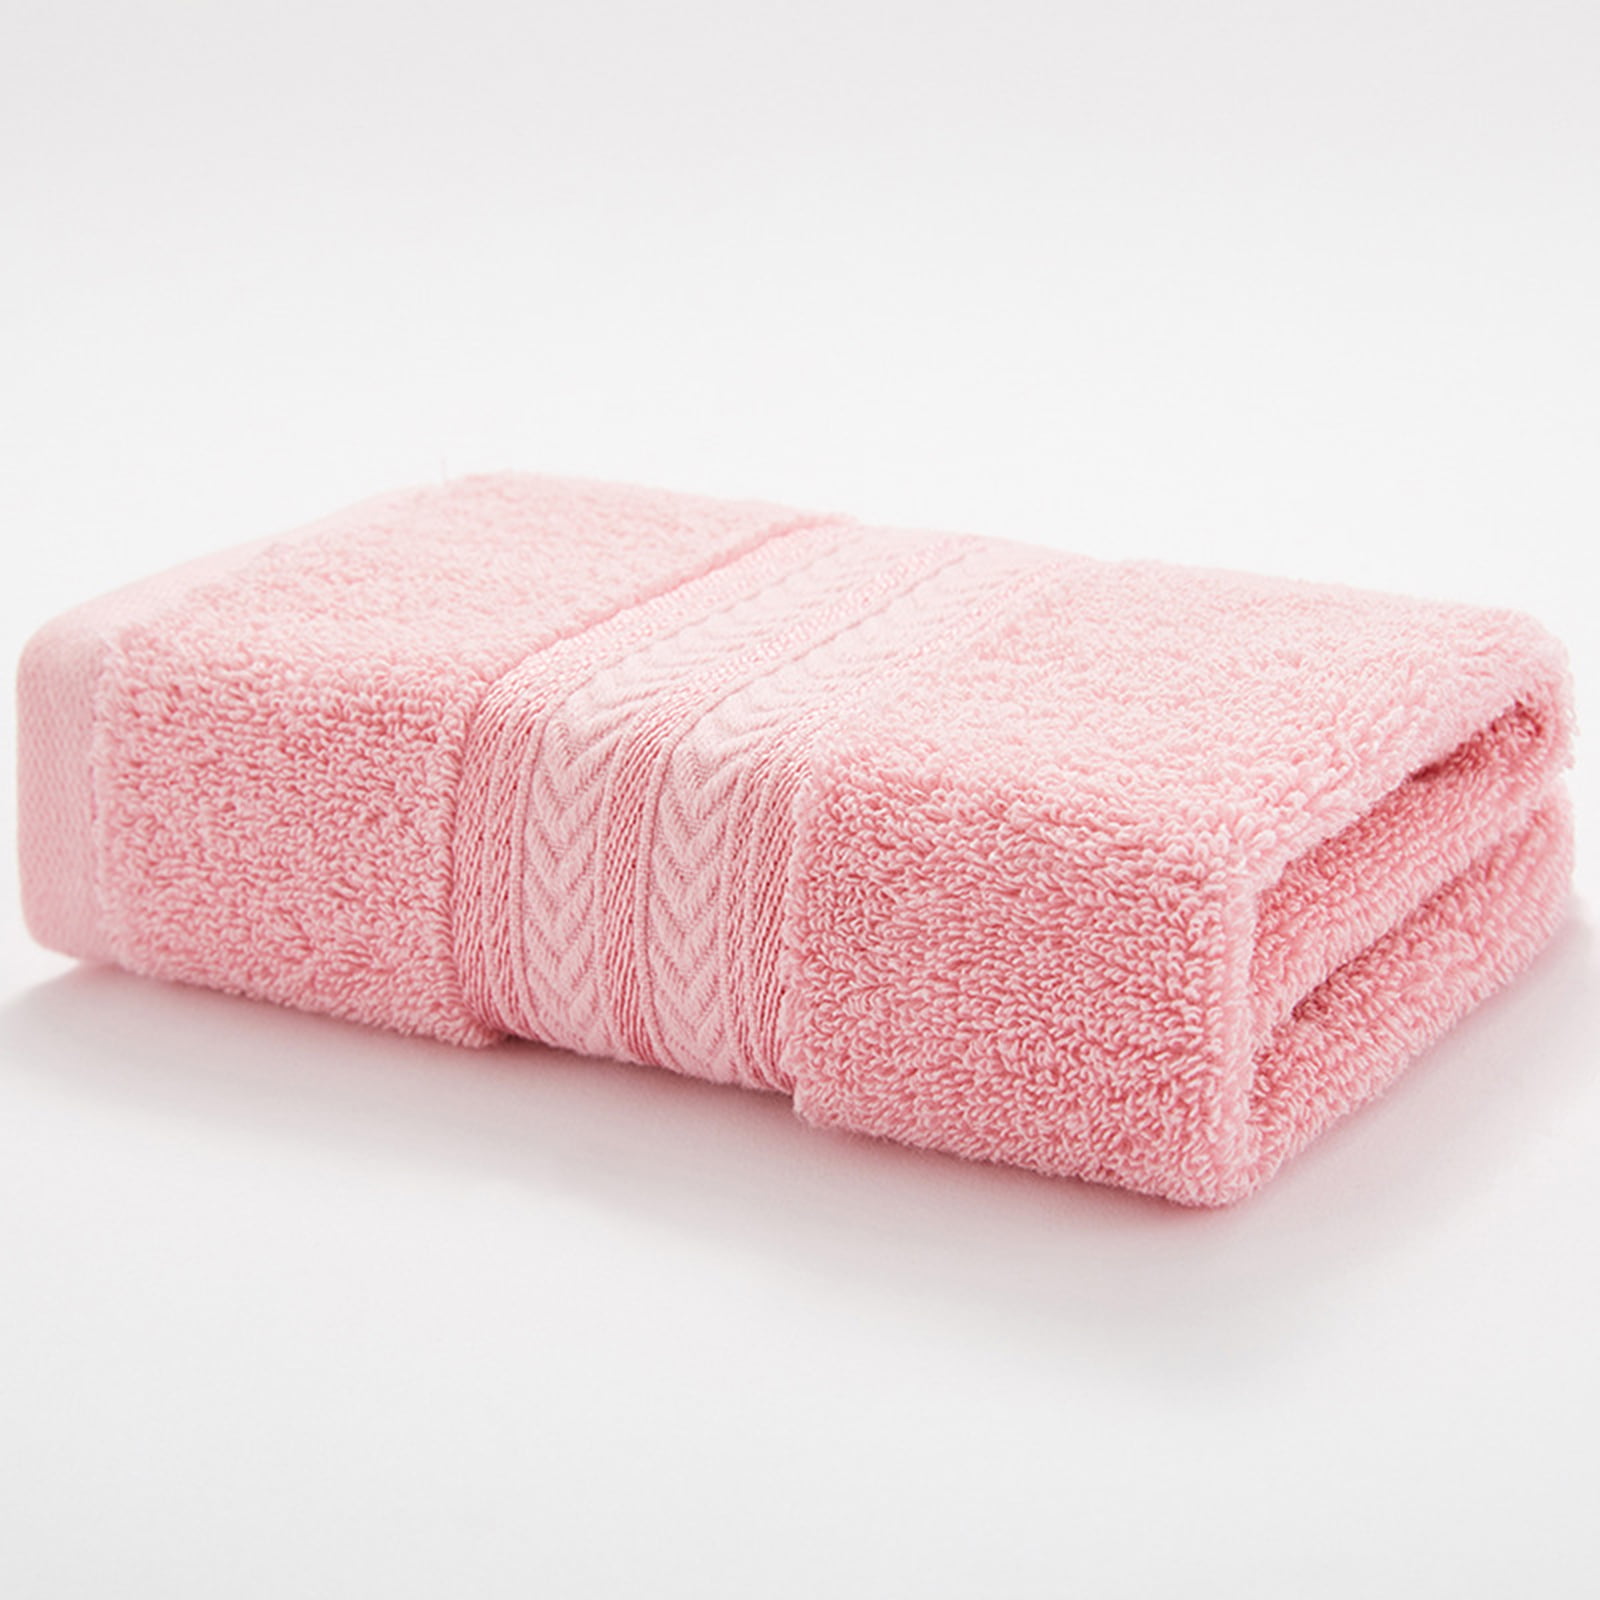 Cotton Multicolor bath face towel Solid Pink Soft Towels Quick dry Absorbency